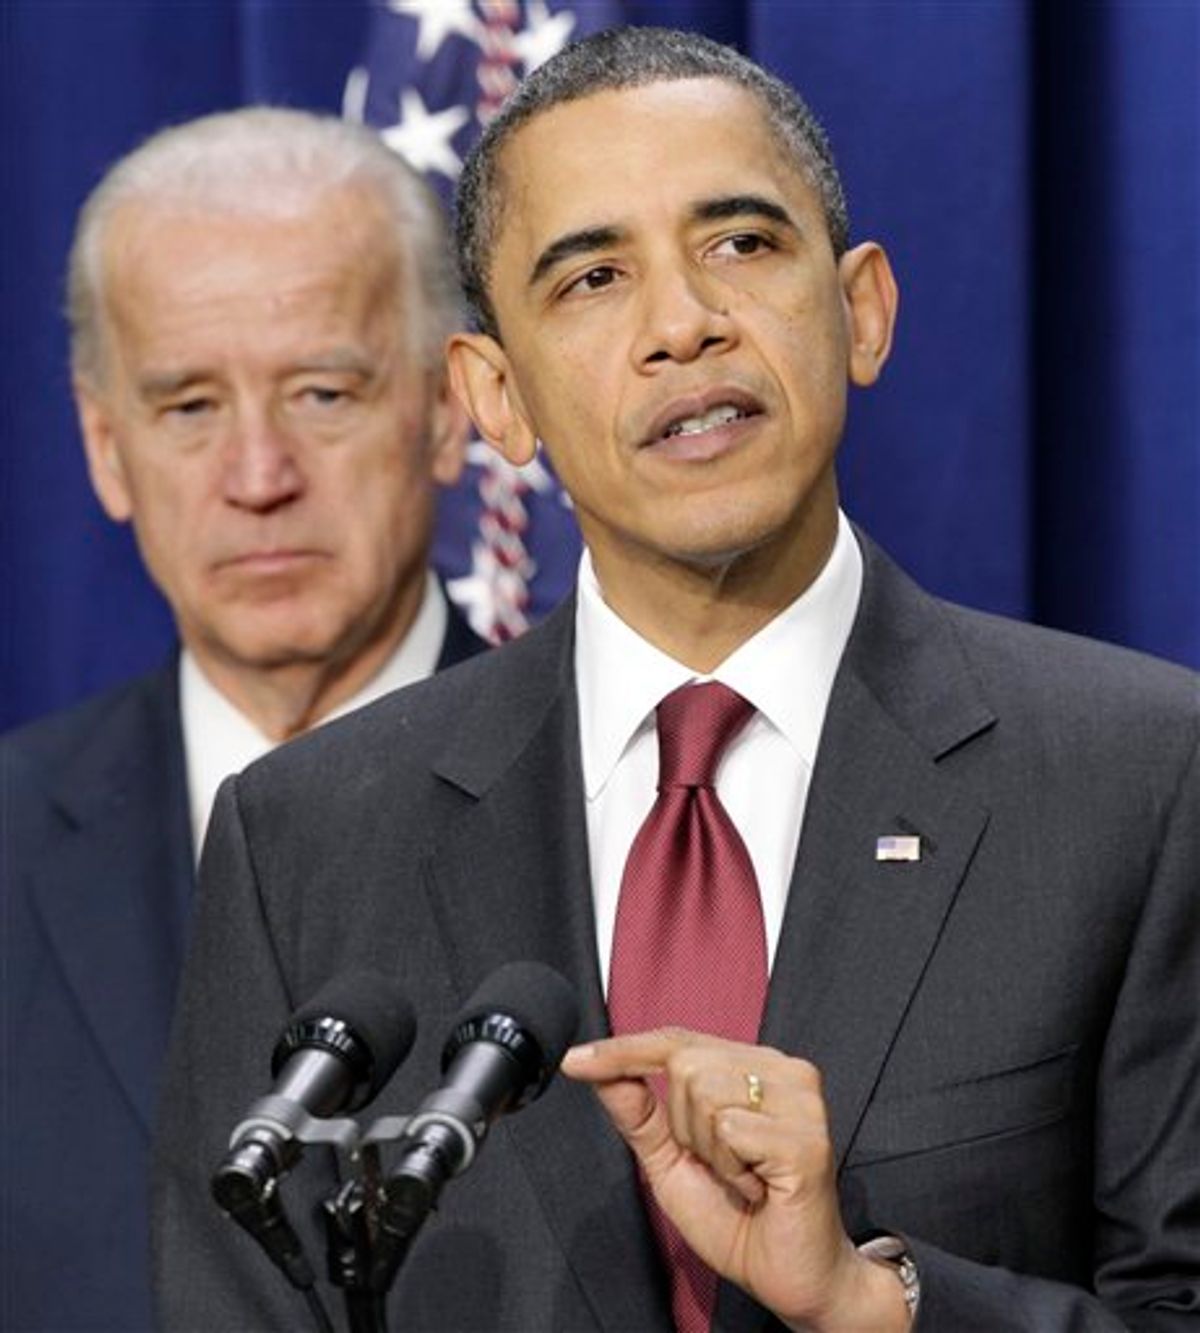 President Barack Obama, joined by Vice President Joe Biden at left, speaks before signing the bipartisan tax package that extends tax cuts for families at all income levels, at the Eisenhower Executive Office Building in the White House complex, Friday, Dec. 17, 2010, in Washington. Aimed at helping to stabilize the recovering economy, the bill keeps in place tax cuts instituted by President George W. Bush for another two years. (AP Photo/J. Scott Applewhite)  (AP)